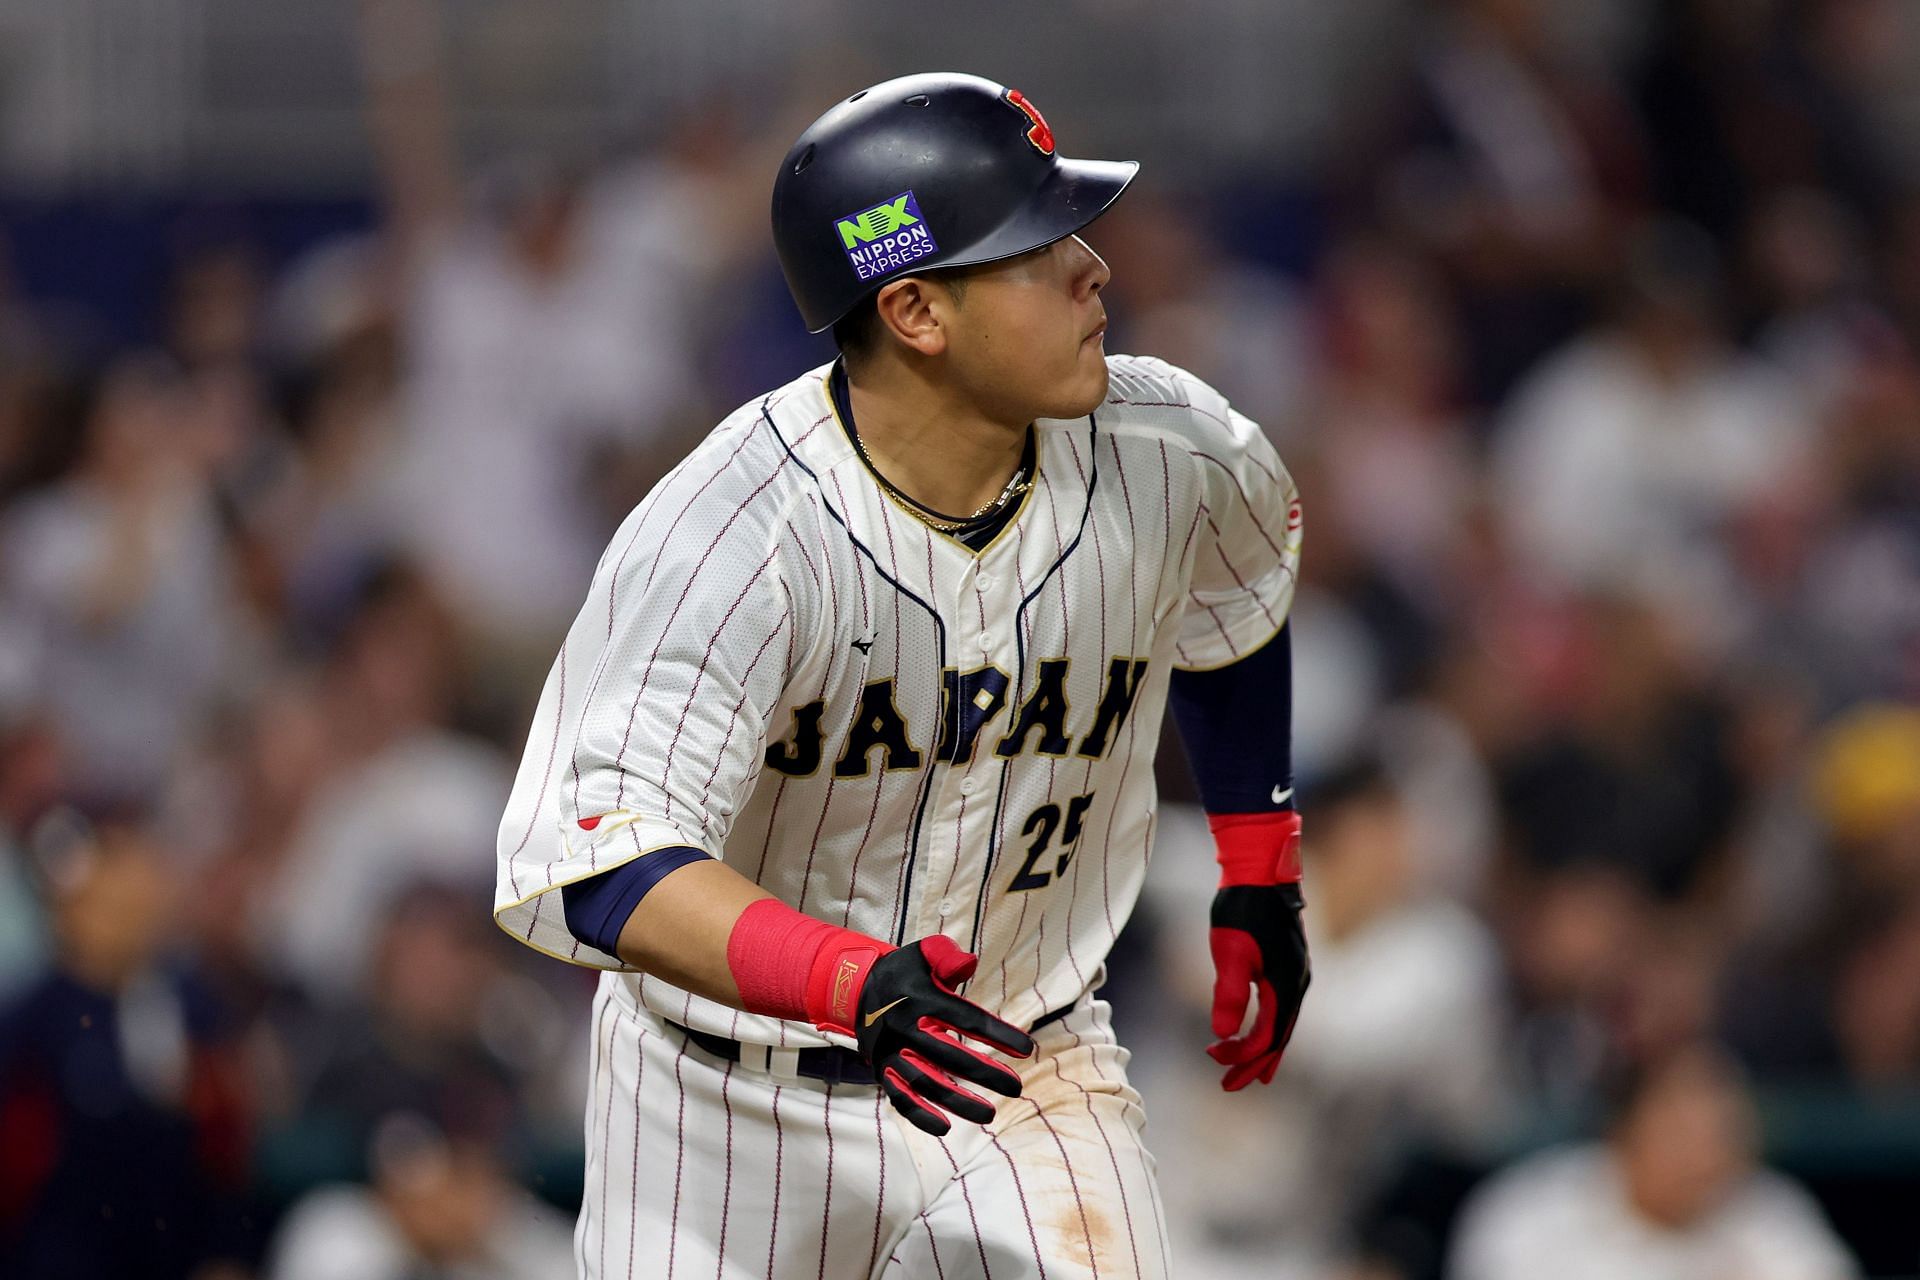 Kazuma Okamoto&rsquo;s path to international free agency requires him to accumulate 9 years of NPB Baseball which would be achieved in the 2026-27 season. 